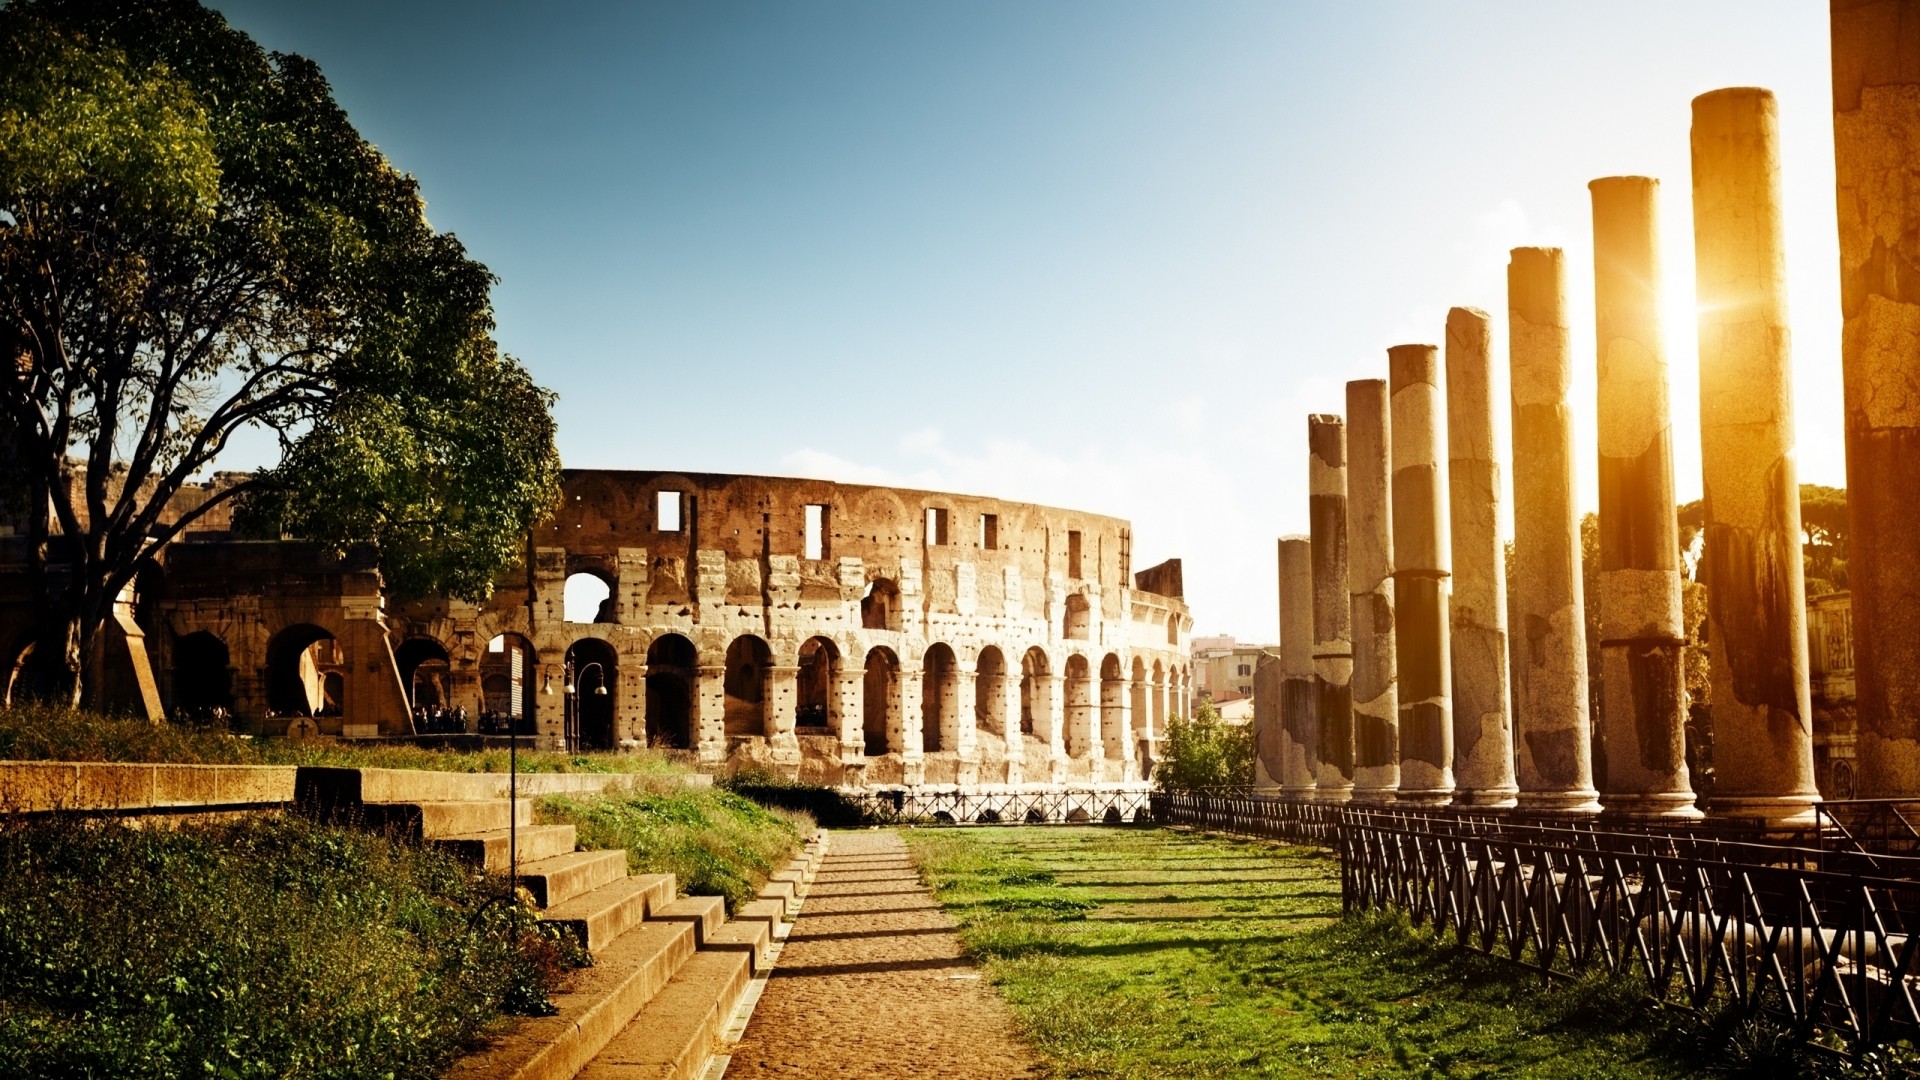 General 1920x1080 architecture trees Sun pillar stone Colosseum Rome Italy capital stairs sunlight path field grass arena arch building monuments